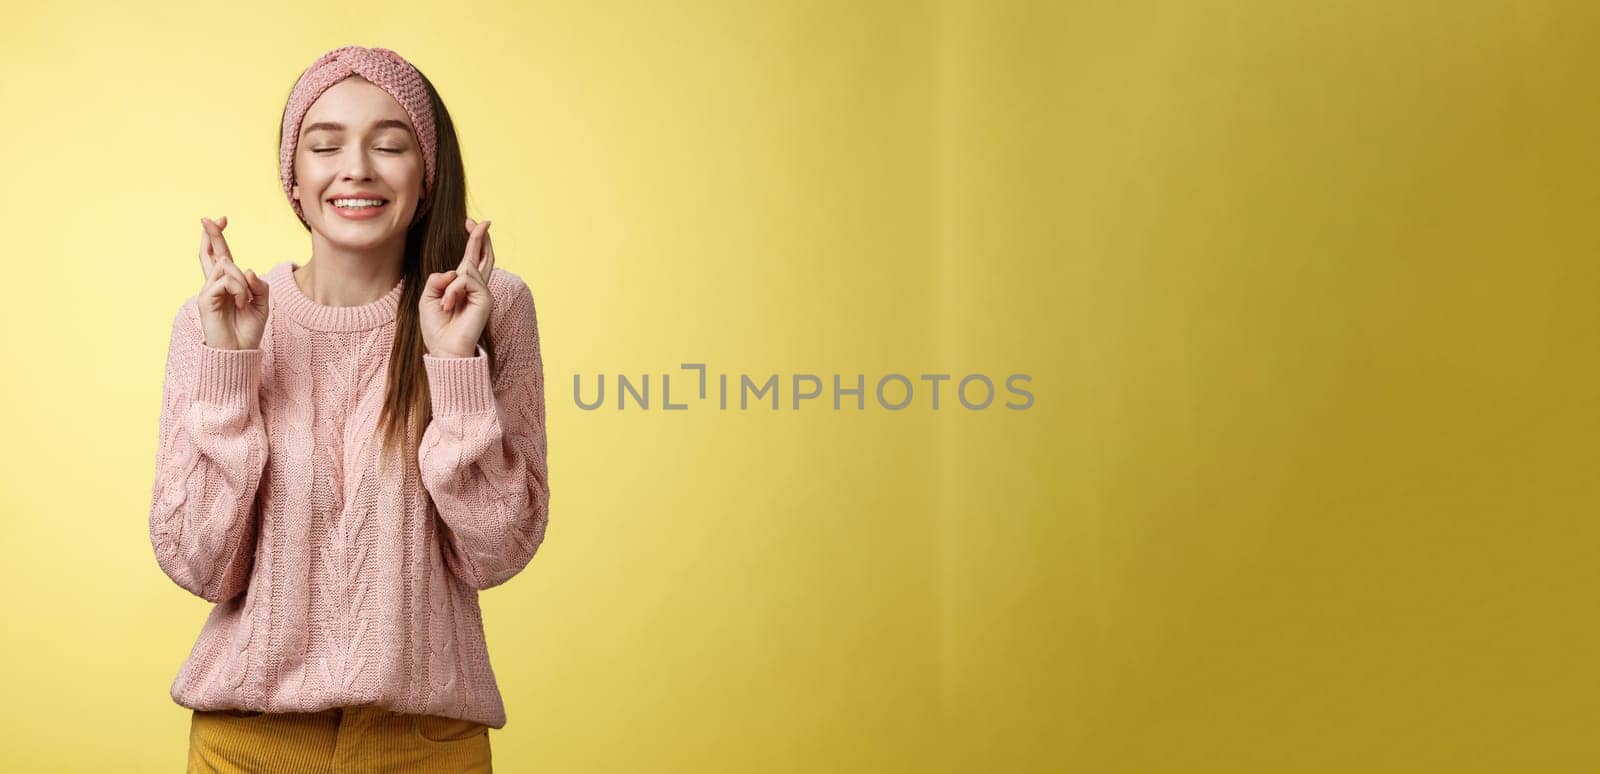 Girl wishing wellness wanting dream come true, cross fingers dreamy, close eyes waiting miracle, anticipating good news, posing excited and joyful against yellow background in knitted warm sweater.